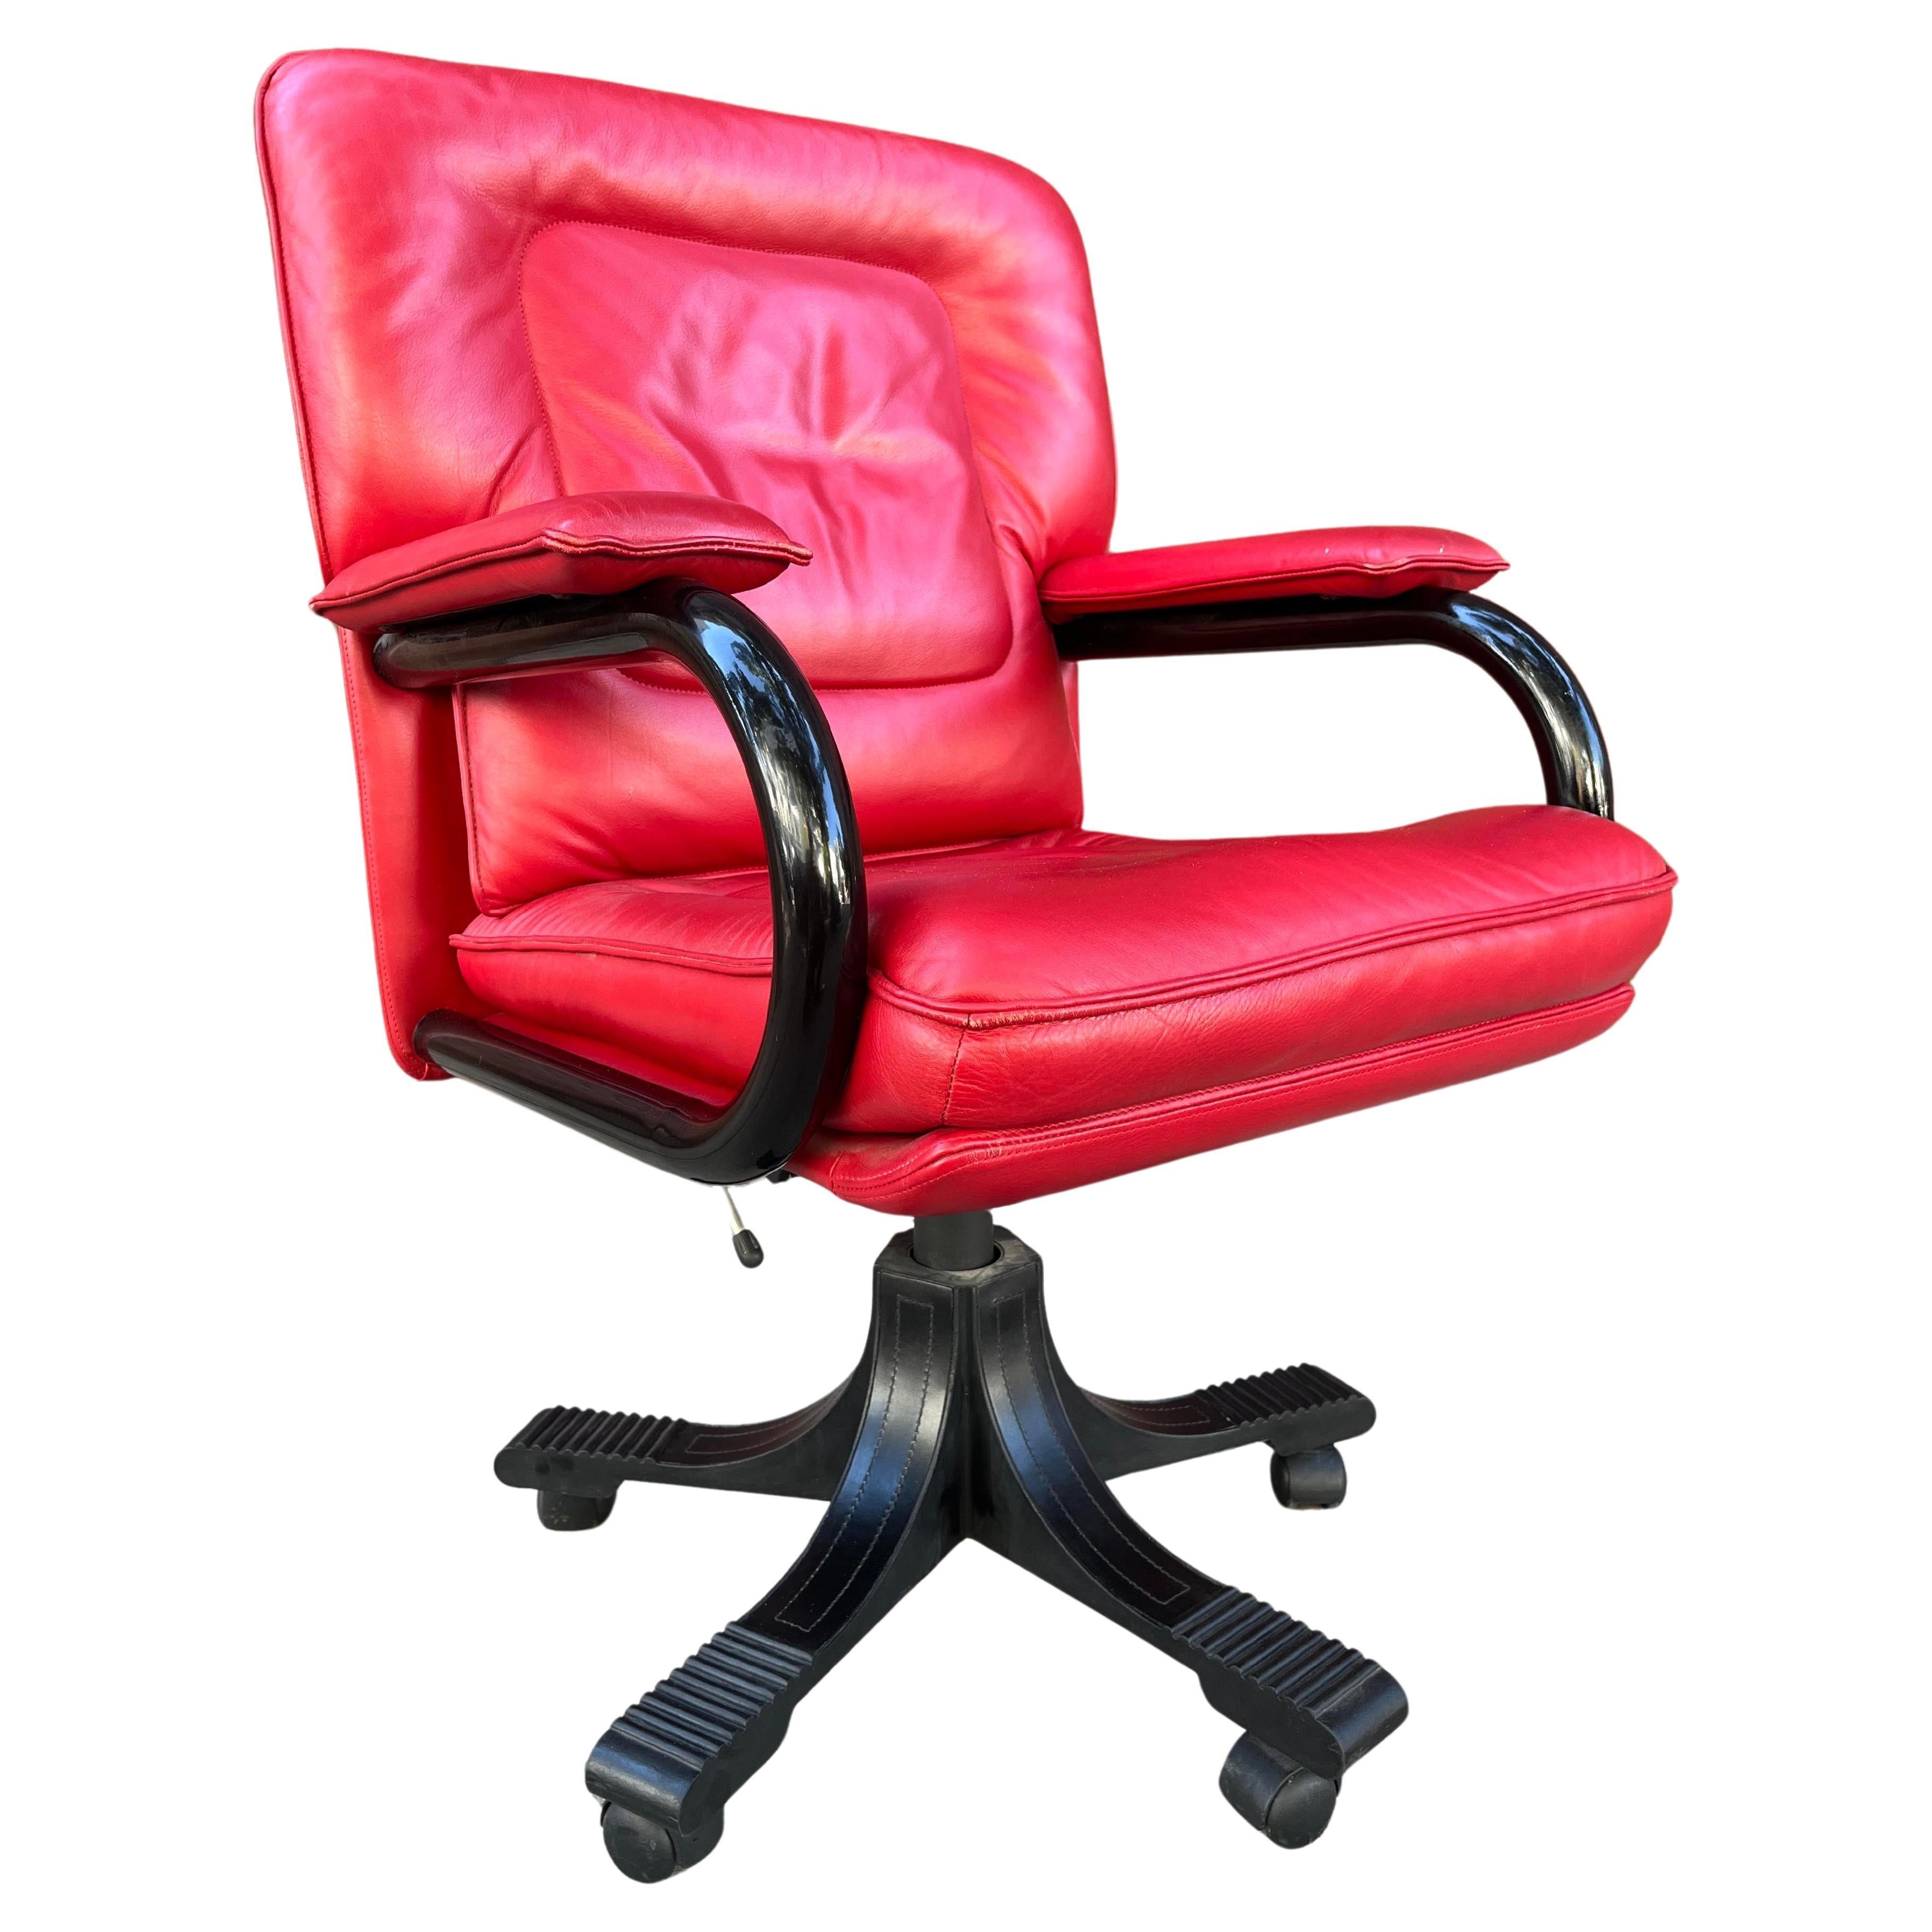 Stunning and luxurious Pace leather Executive Chair